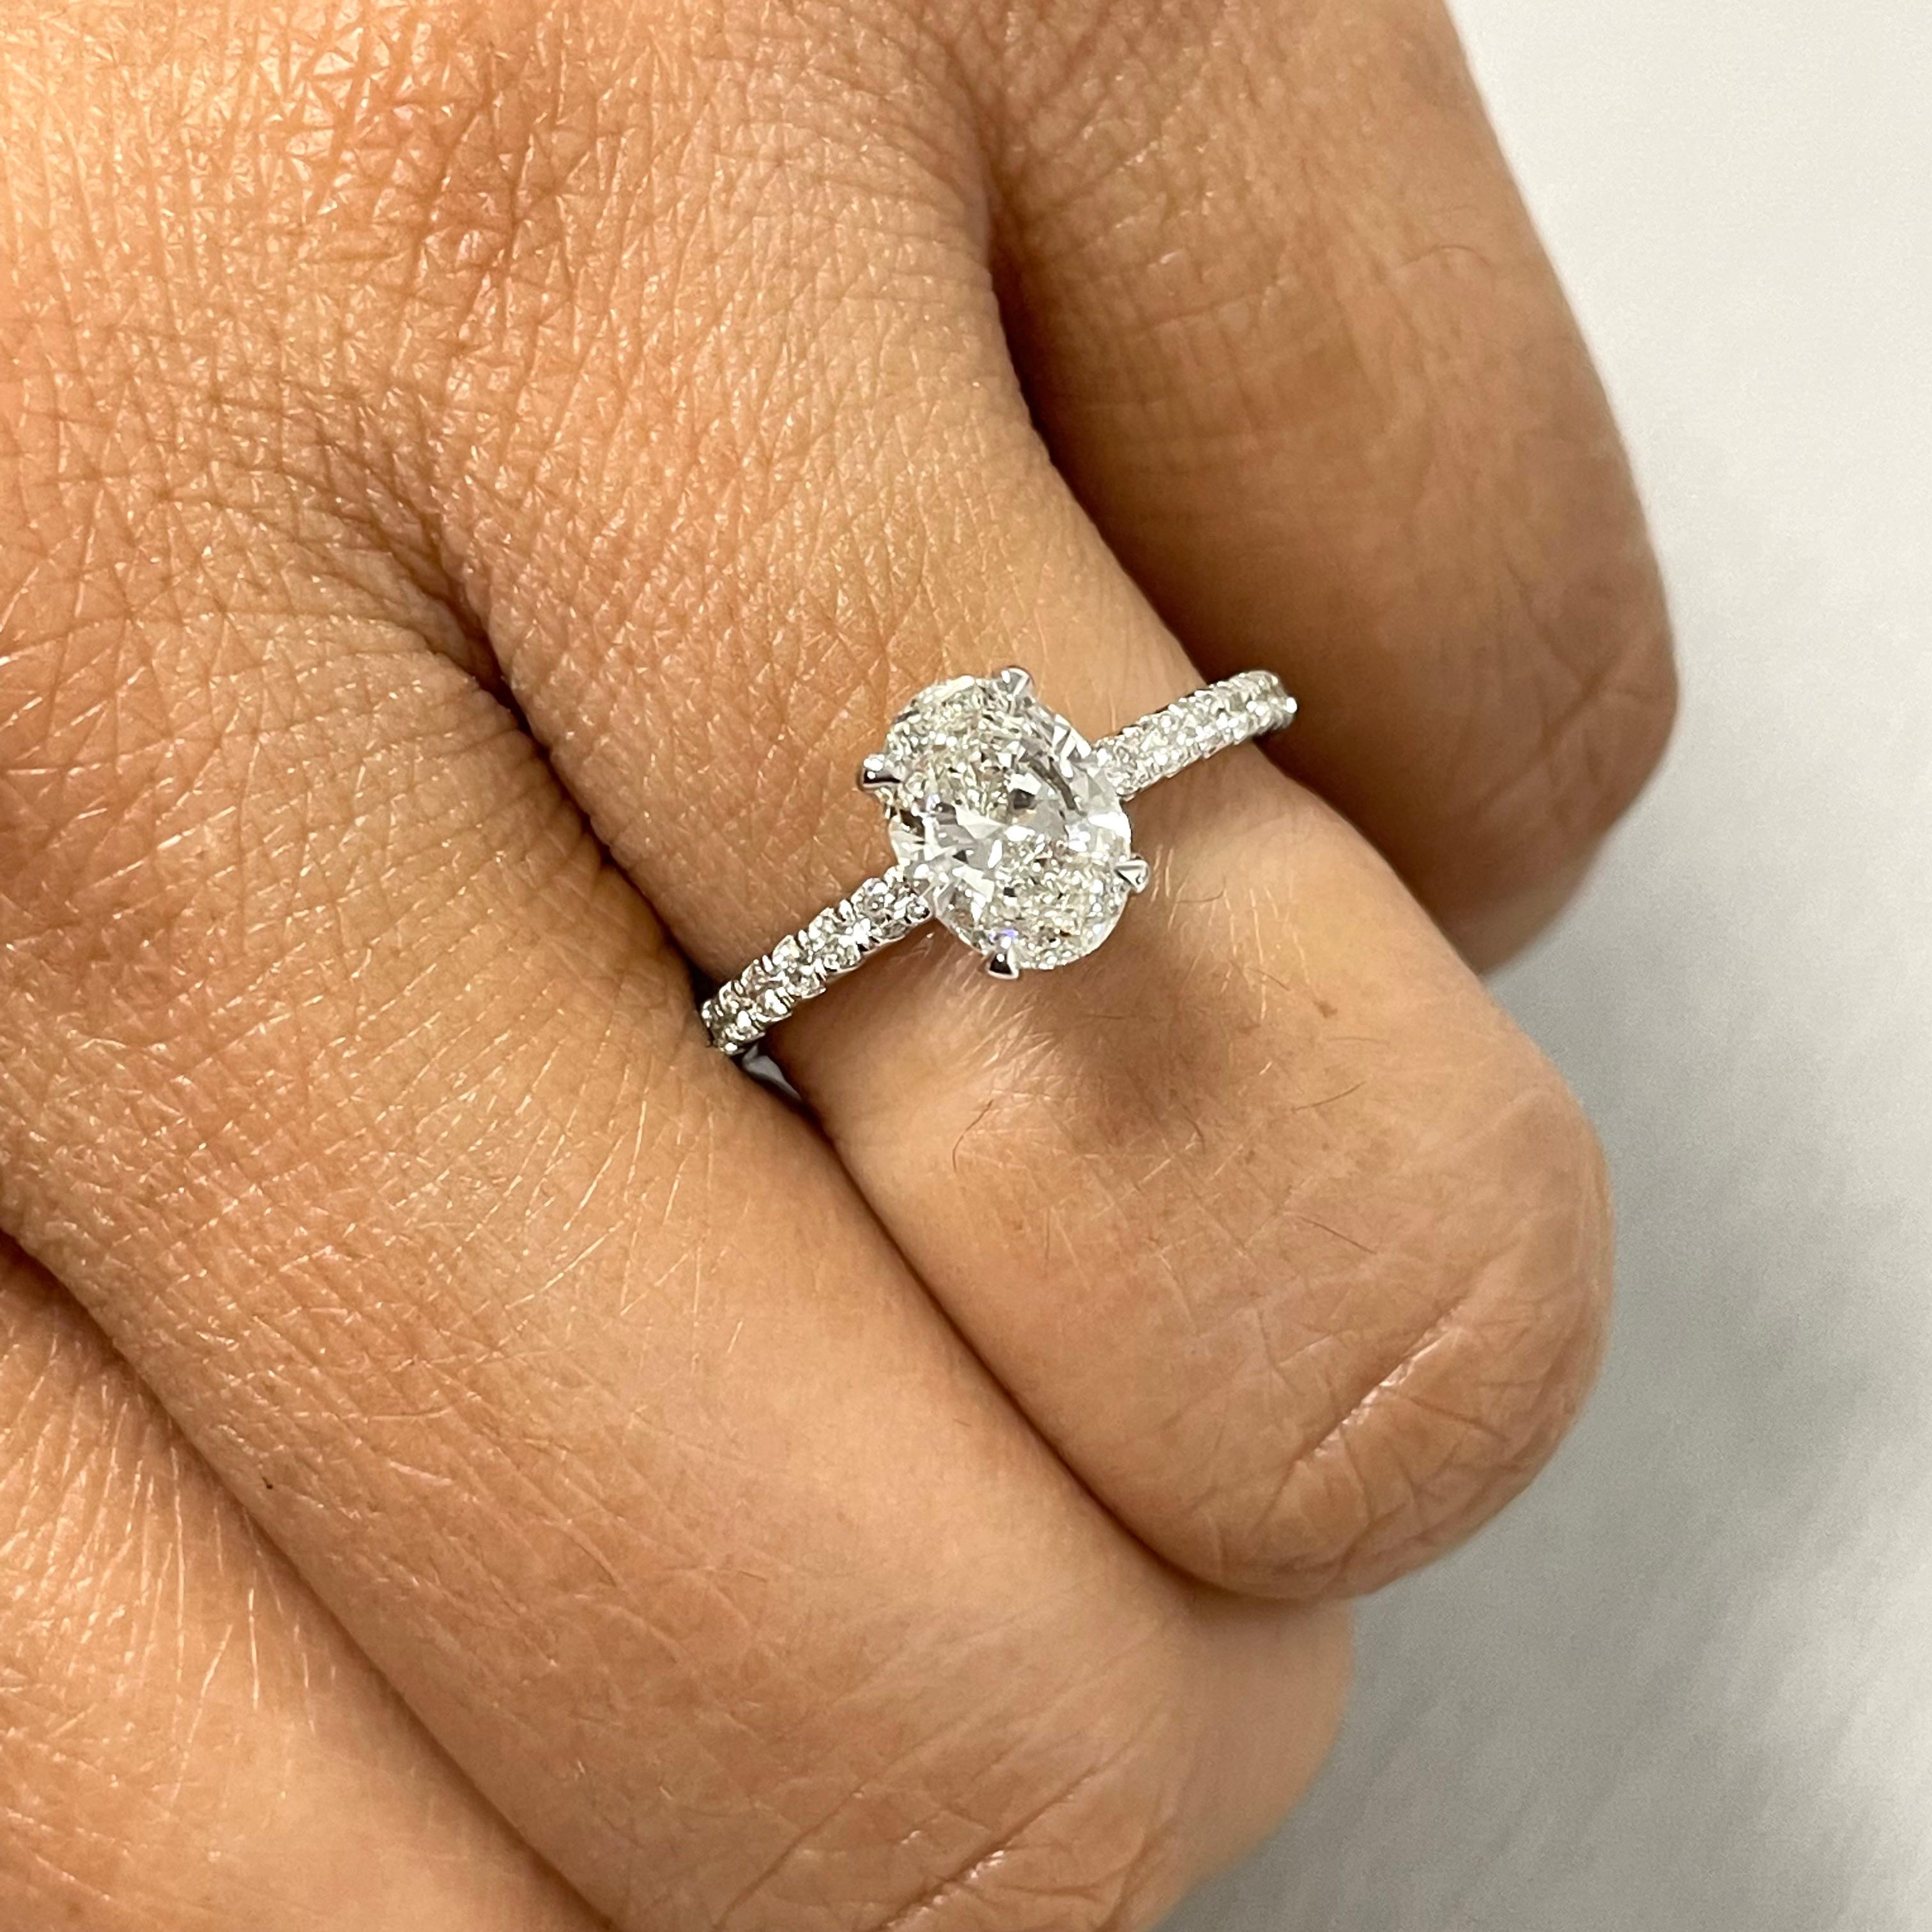 A sultry classic, this timeless and gorgeous oval diamond engagement ring is a stunner with its measurements and is perfectly suited to wow and dazzle her. A lovely H color VS clarity solitaire, this Oval is an enviable beauty.

Center Diamond